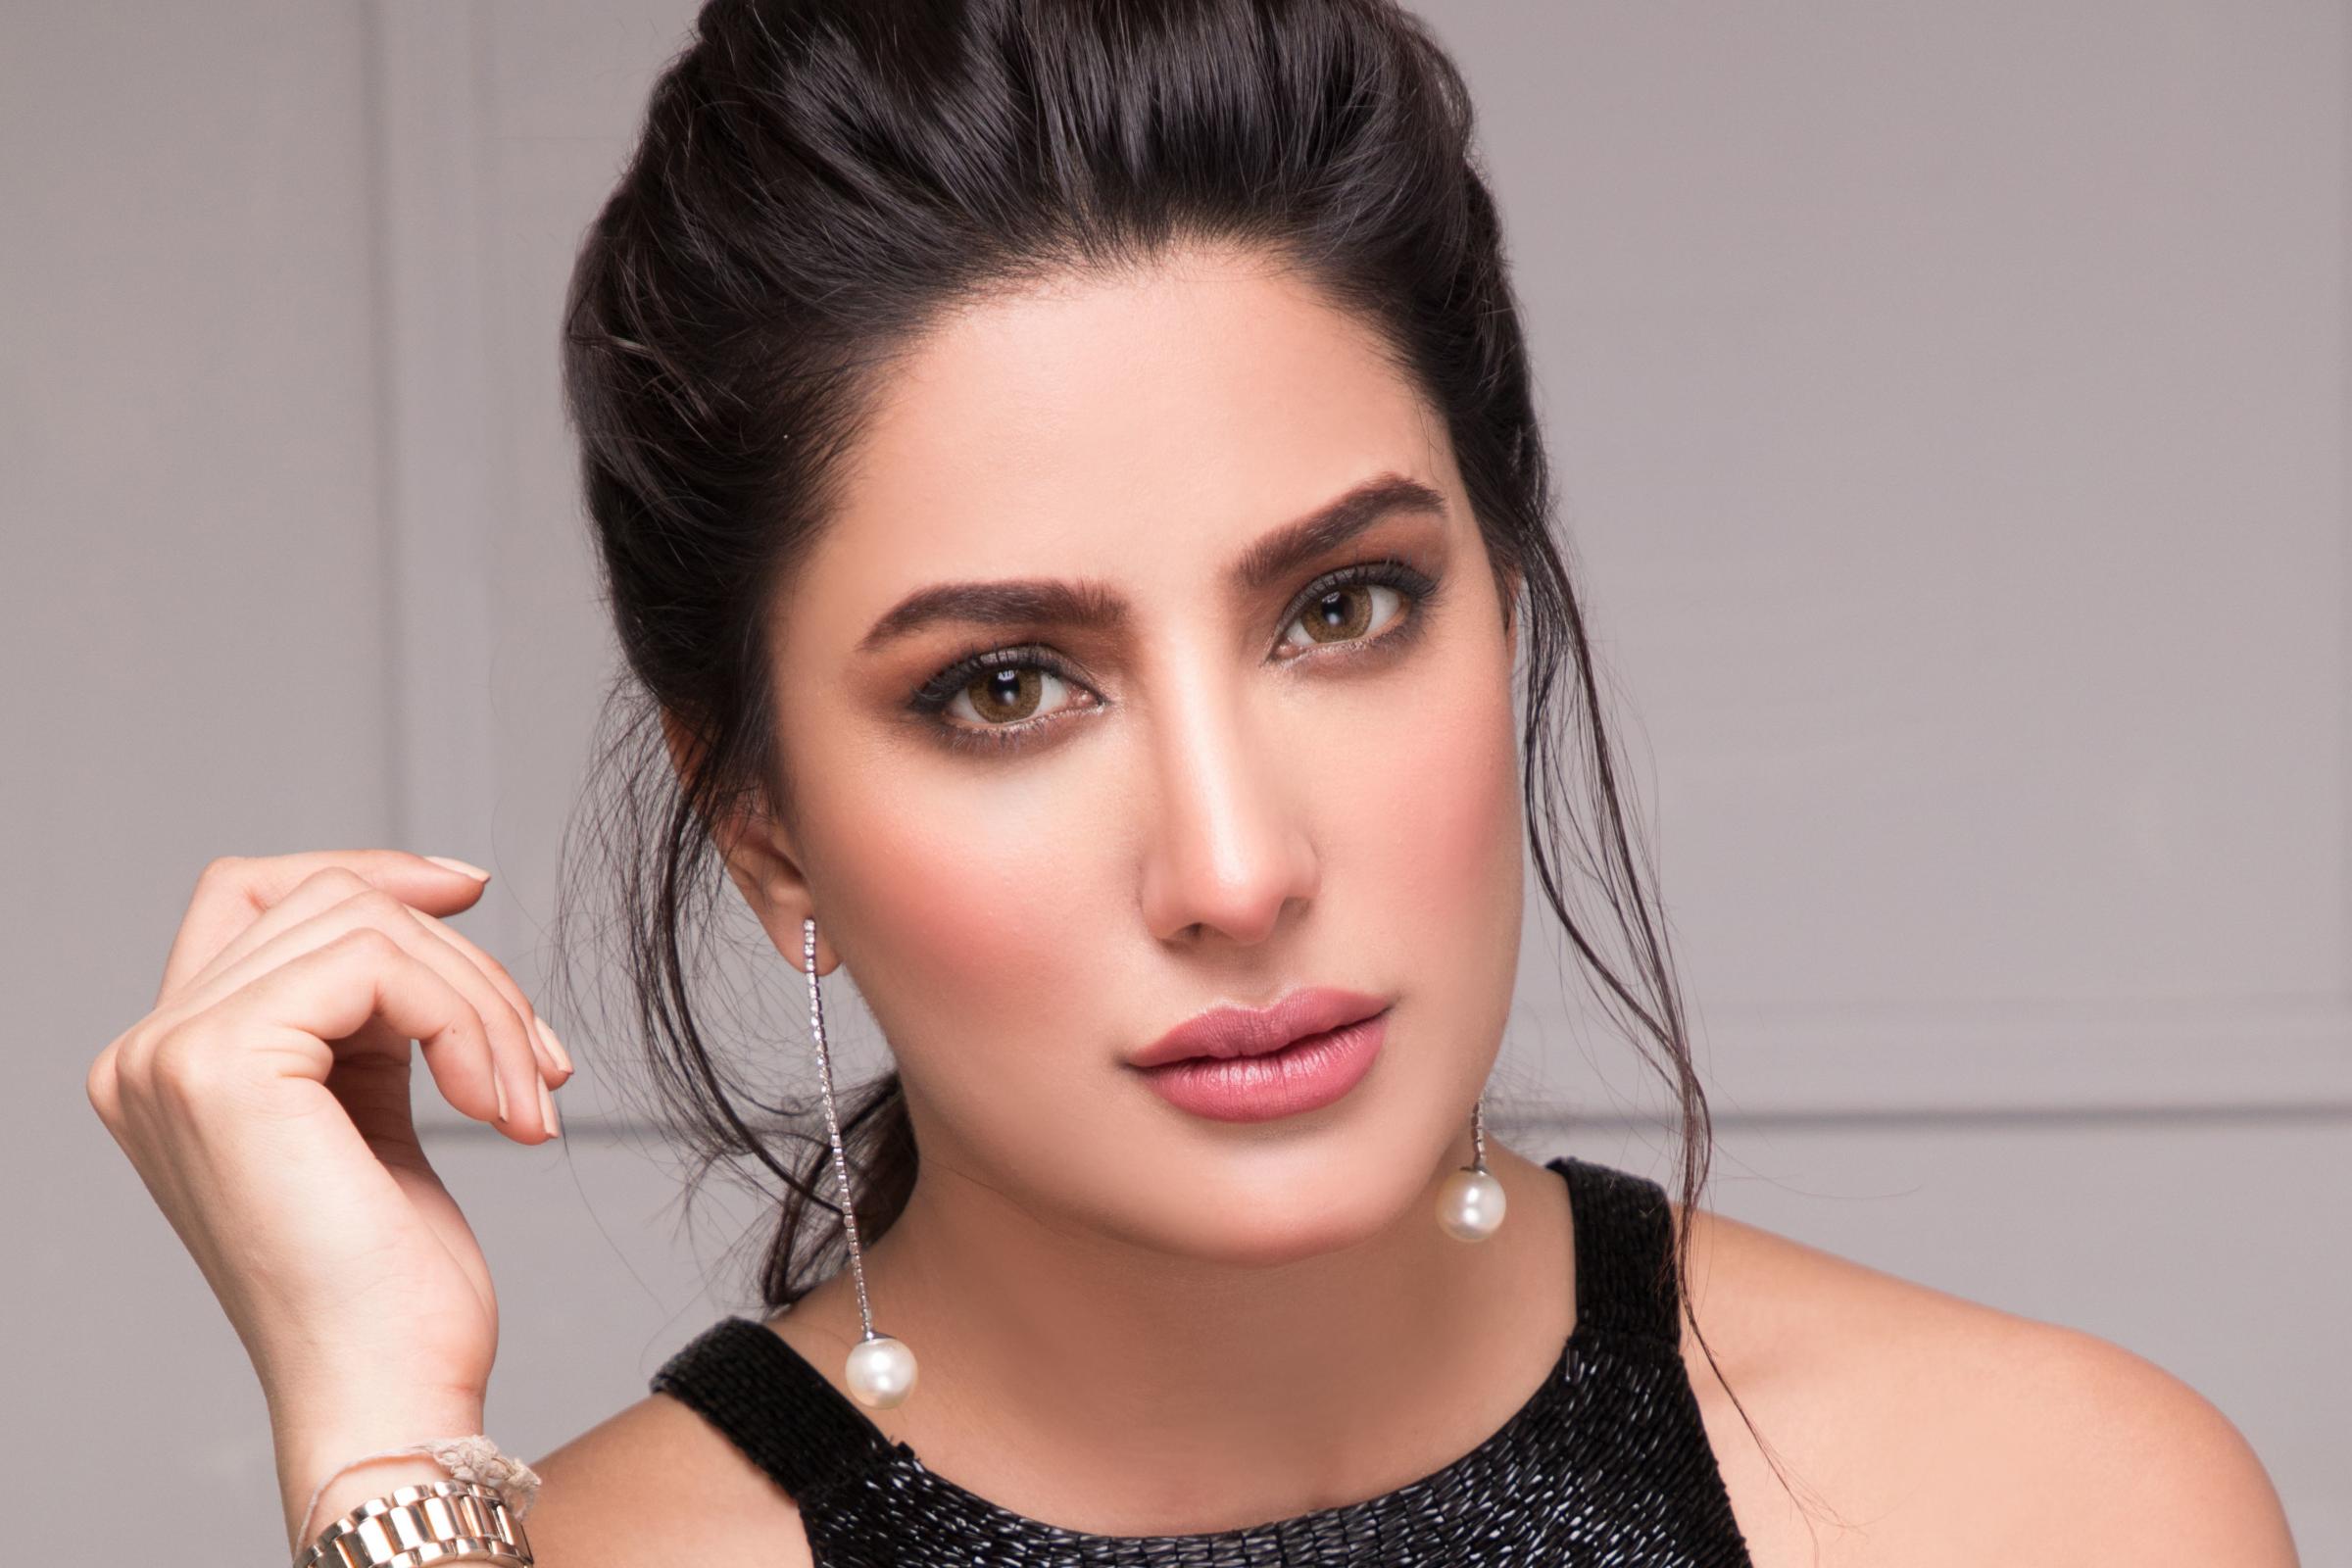 The superstar Mehwish Hayat recently showed up in “Ghabrana Mana hai”, a show that is hosted by the versatile writer-actor Vasay Chaudhry. During the conversation, Vasay Chaudhry put forward a question for the Mehwish that made the actress call out Vasay for body shaming. Want to know what exactly happened during the show? Check out these interesting details and videos! Mehwish Hayat Stops Vasay Chaudhry on Body shaming During Show! While everyone knows Mehwish as a brilliant actress from the industry who exhibited her talent through dramas and films, it was something pleasantly surprising seeing her calling out Vasay during the show for body shaming. We know that in our society, it is such a common practice to body shame people without dealing with the effects. People pass comments on the physique of a person while ignoring the fact that it can be hurtful for the target individual. However, taking it as a usual practice, our shows, dramas, and other entertainment stuff has such material in the name of satire that is basically giving way to body shaming.  So, when Mehwish Hayat was on Vasay's show, he asked her in a humorous way: "WHICH PAKISTANI ACTOR CAN PLAY THE ROLE OF ERTUĞRUL’S COMPANION?" Mehwish replied: "AHMED ALI BUTT" While responding to it, Vasay commented: “AHMED ALI BUTT ON A HORSE AND THAT HORSE HAS TO RUN, WE HAVE TO SAVE THE HORSE”. Mehwish stopped Vasay and said: "YOU CAN NOT BODY SHAME SOMEONE IN FRONT OF ME, IF YOU ARE SITTING WITH YOUR FRIENDS THAT’S THE OTHER THING BUT YOU CAN’T SAY THINGS LIKE THIS ON SUCH A PLATFORM, PEOPLE WILL PICK WHAT YOU HAVE SAID AND REPEAT IT AND THEN YOU WILL BE RESPONSIBLE FOR WHATEVER HAPPENS”. Watch this video clip! Ahmad Ali Butt's Hilarious Response! As we know that the kind-hearted Ahmad Ali Butt takes the humour out of every situation, so he did the same when this clip from the show went viral.  While responding to Mehwish's call out and sarcastically addressing Vasay Chaudhry, Ahmad Butt posted this on his Insta: The fans really loved this interaction between Mehwish Hayat and Vasay Chaudhry while Ahmad Butt's response was cherry on top.  So, what do you think about body shaming and Mehwish's statement? Don't forget to share your valuable feedback with us!